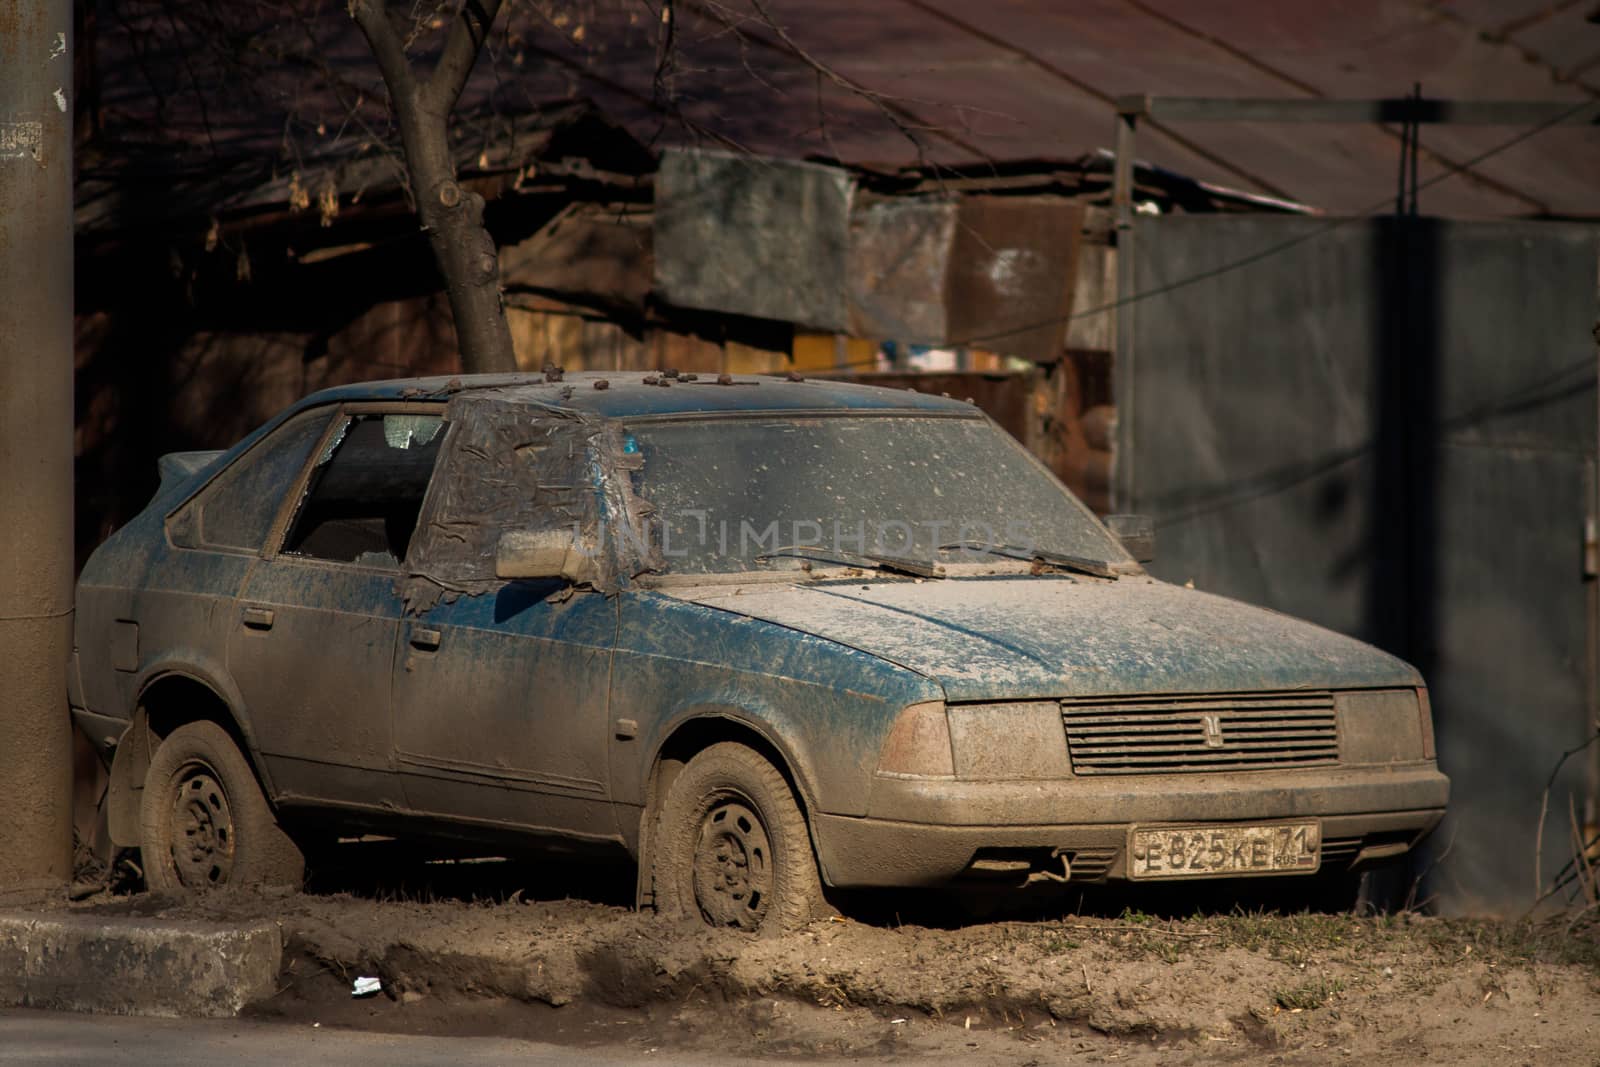 TULA, RUSSIA - APRIL 13, 2012: abandoned dirty car on side of spring road with slum ghetto background. Thick layer of dust over car.